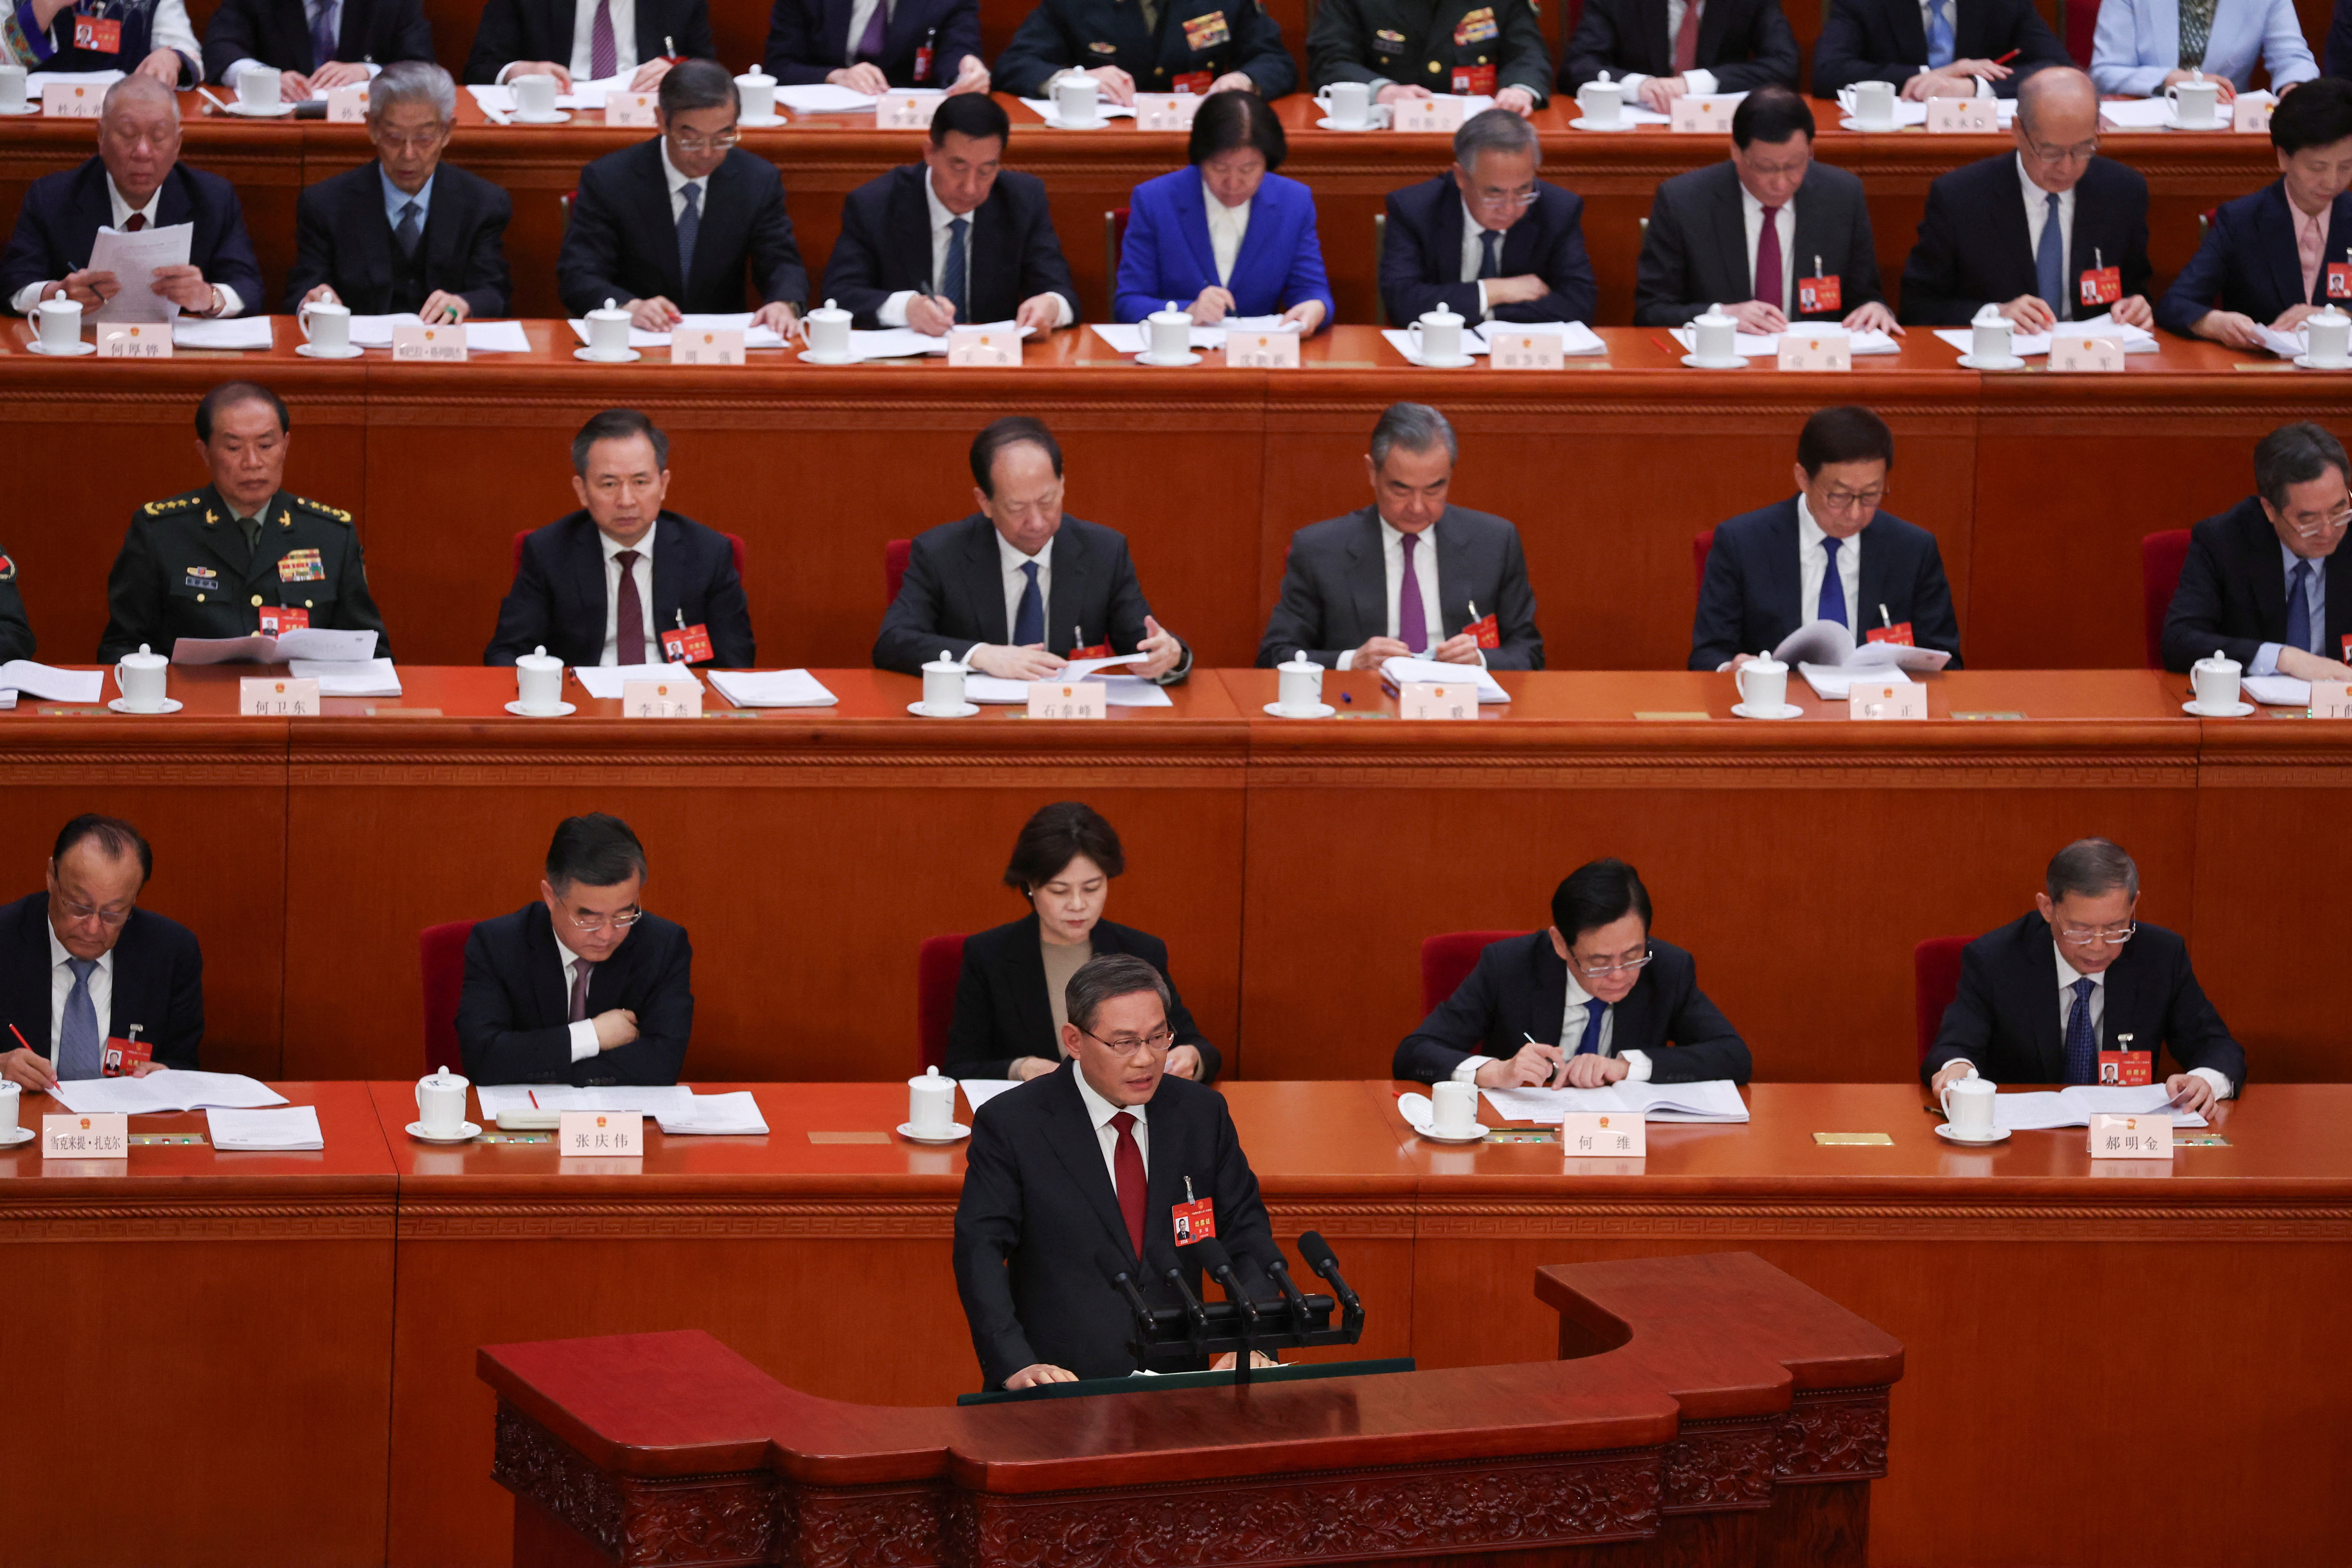 Opening session of the National People's Congress (NPC) at the Great Hall of the People in Beijing